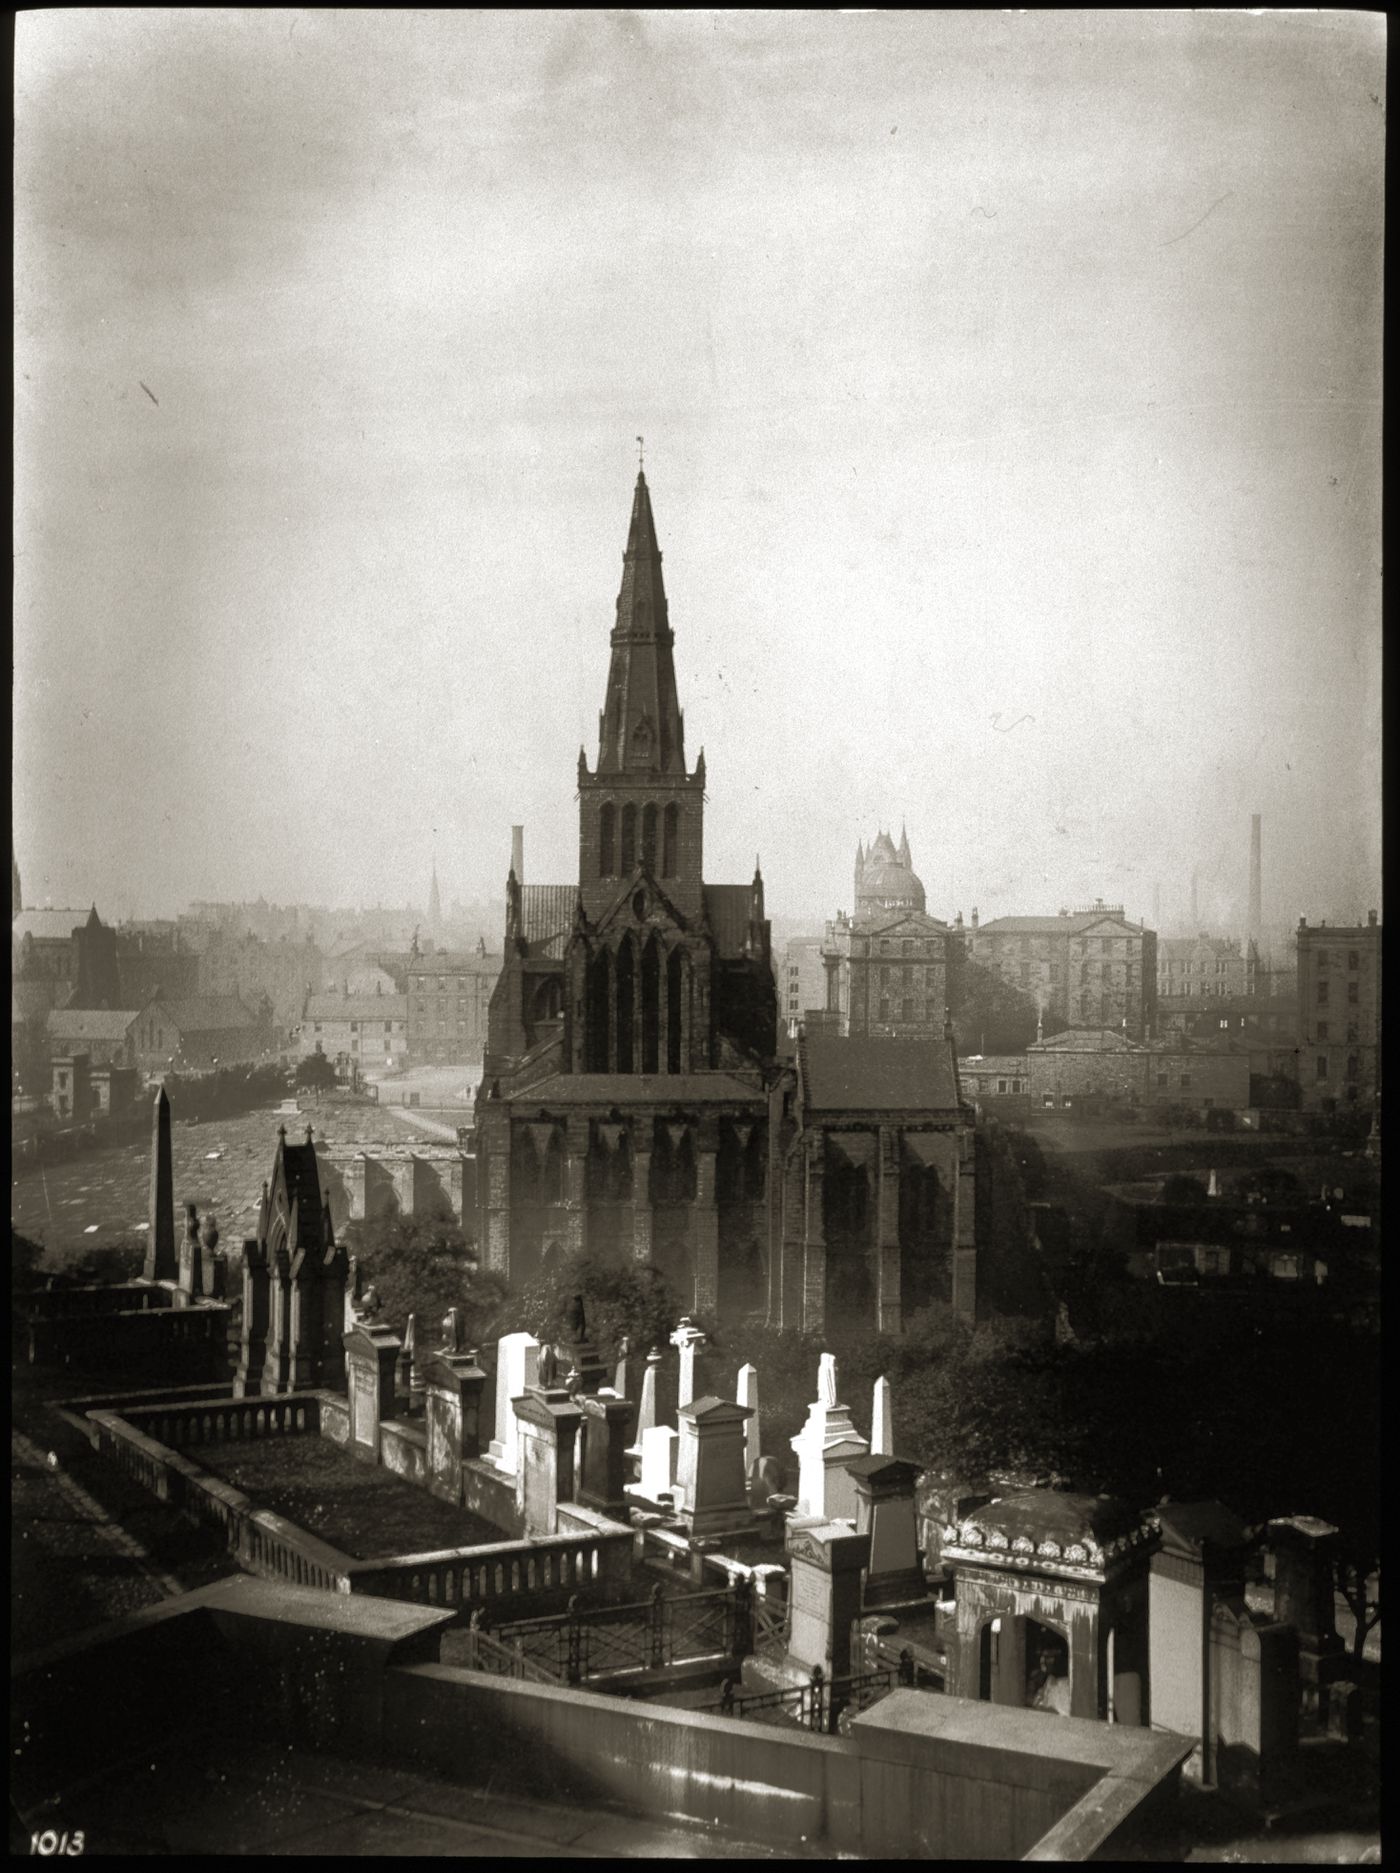 View of Glasgow Cathedral, with churchyard in the foreground, Glasgow, Scotland